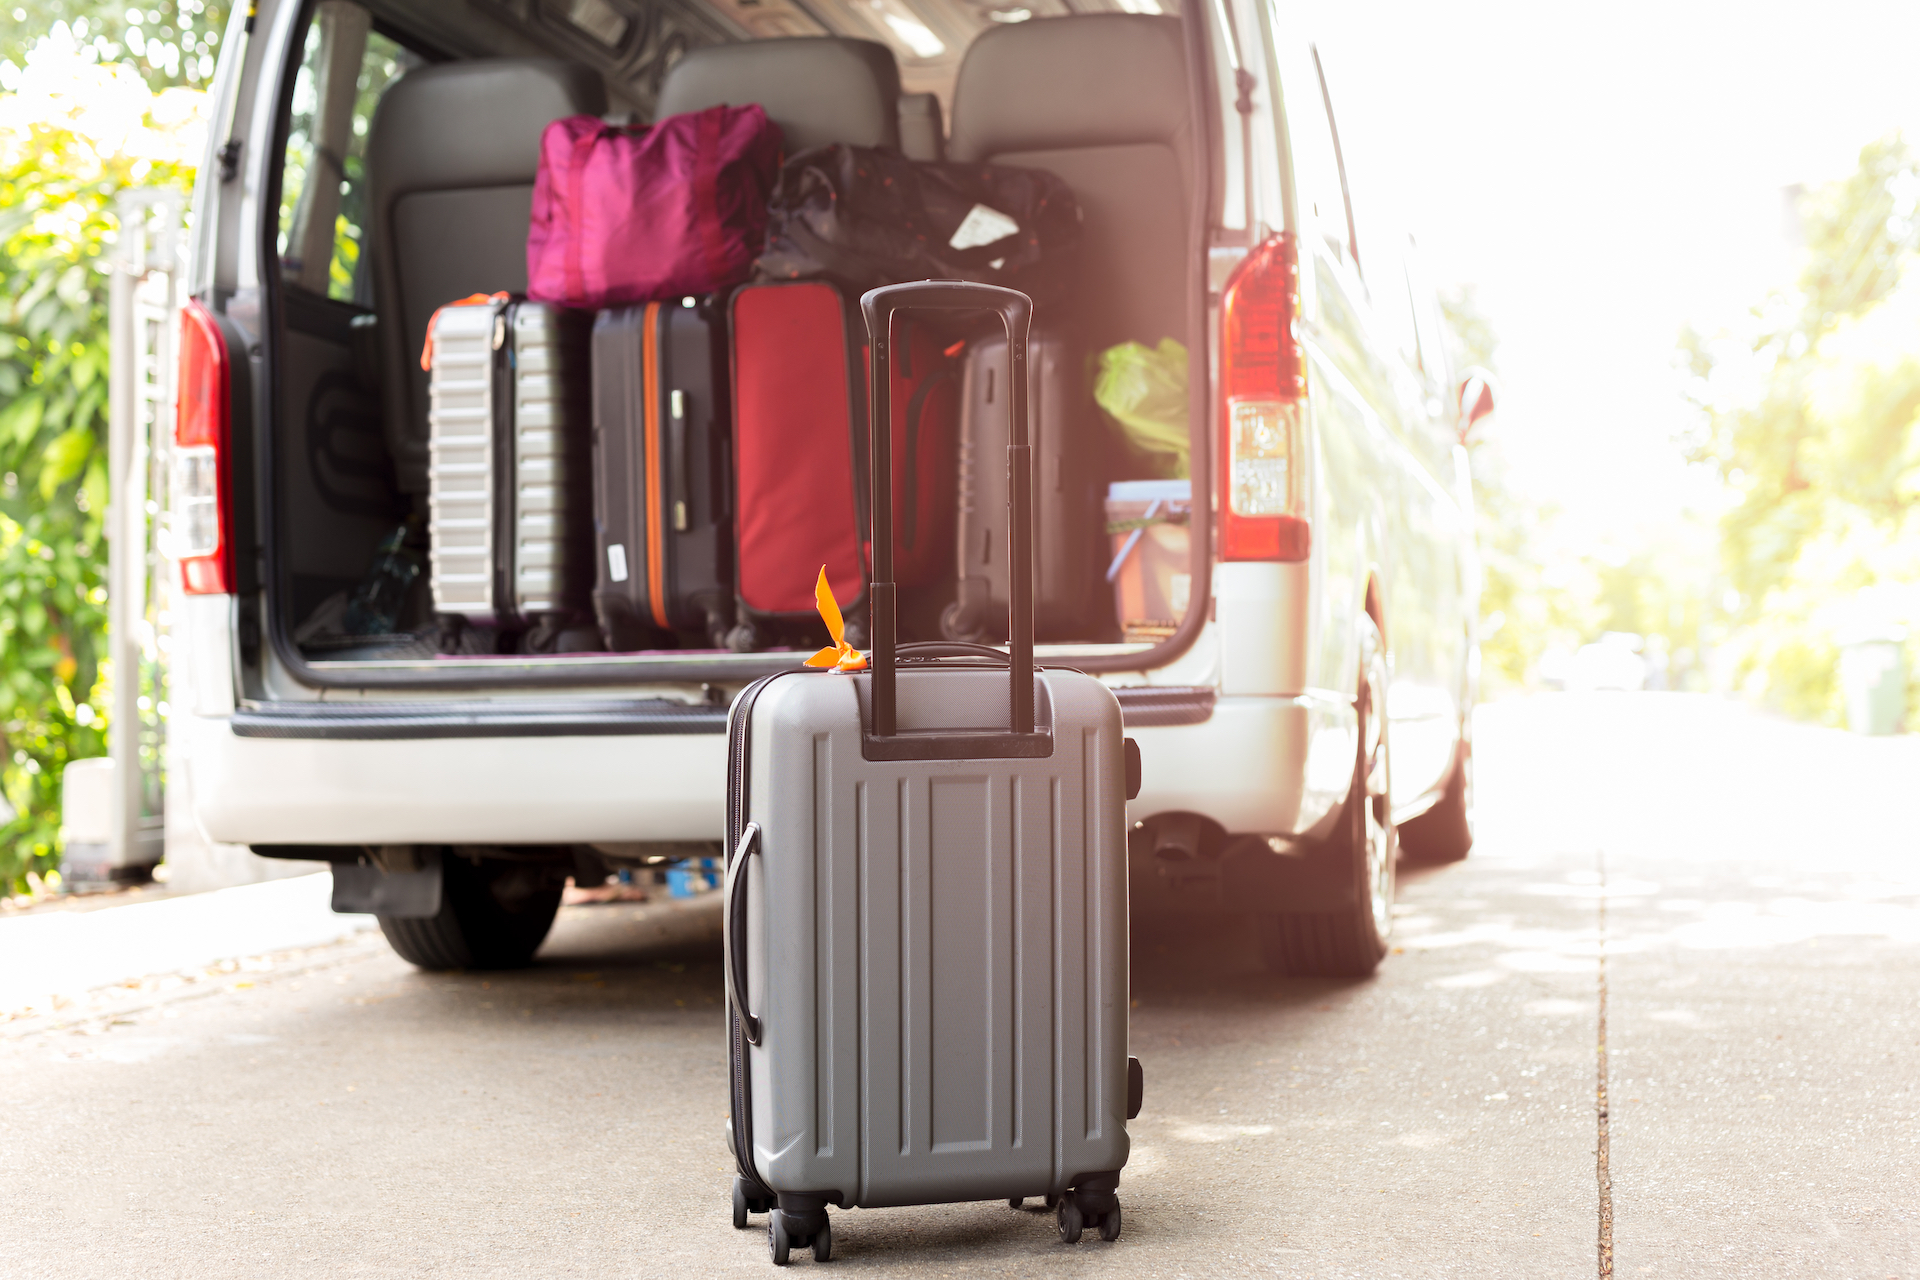 Transfer from Malaga Airport Luggage